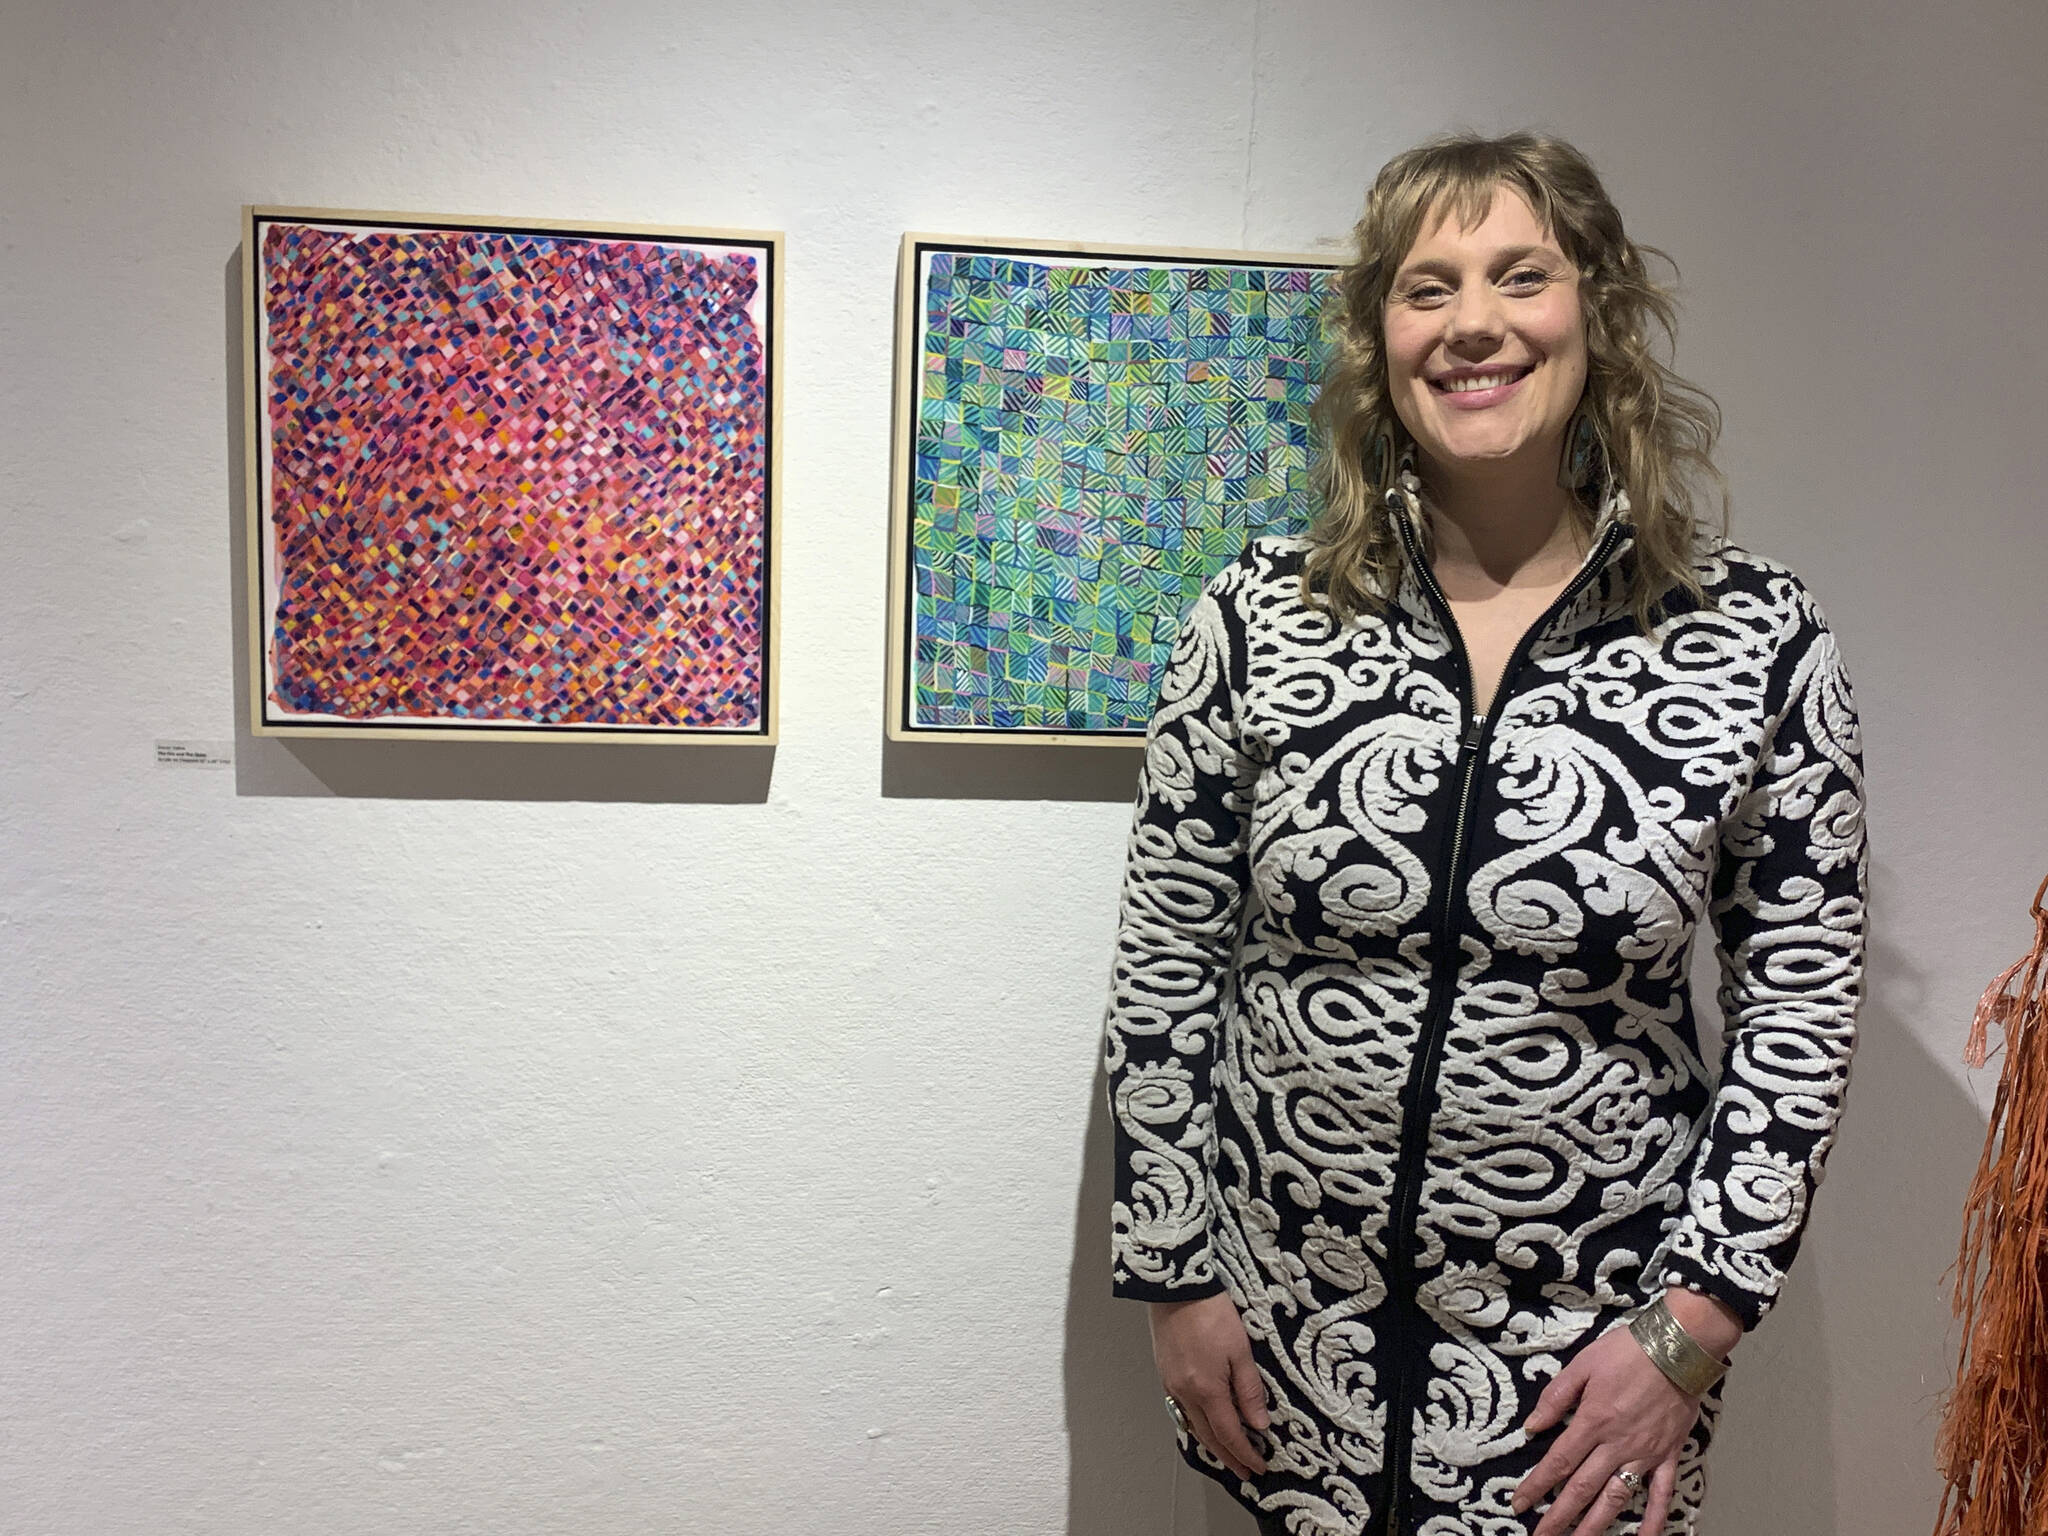 Fairbanks artist Somer Hahm poses with her acrylic on clay board paintings at the opening of the Mother exhibit showing this month at Bunnell Street Arts Center. (Photo by Christina Whiting)